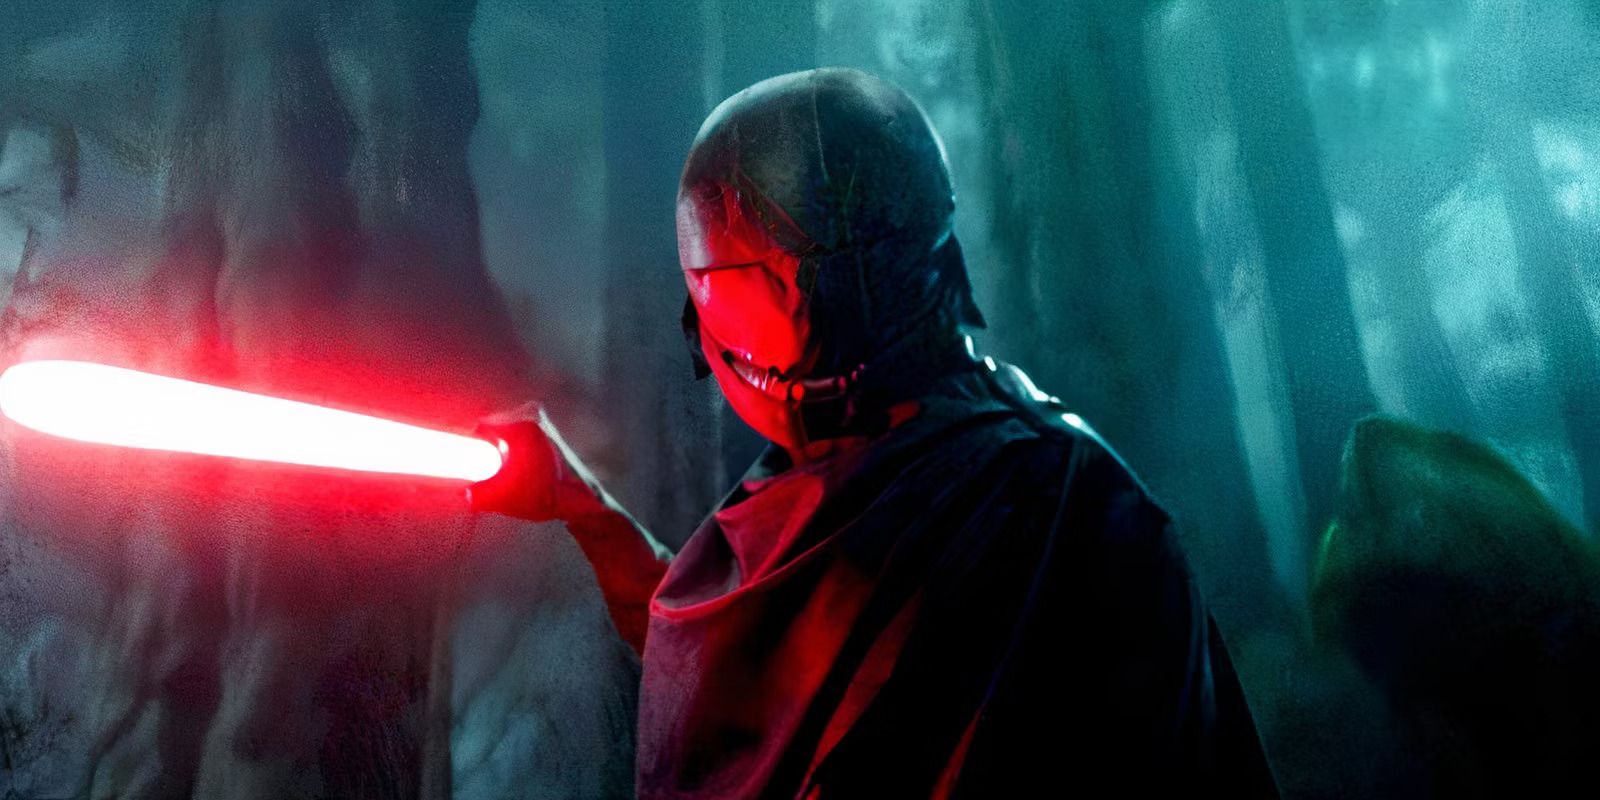 the-stranger-aims-his-red-lightsaber-at-mae-in-the-acolyte-episode-5